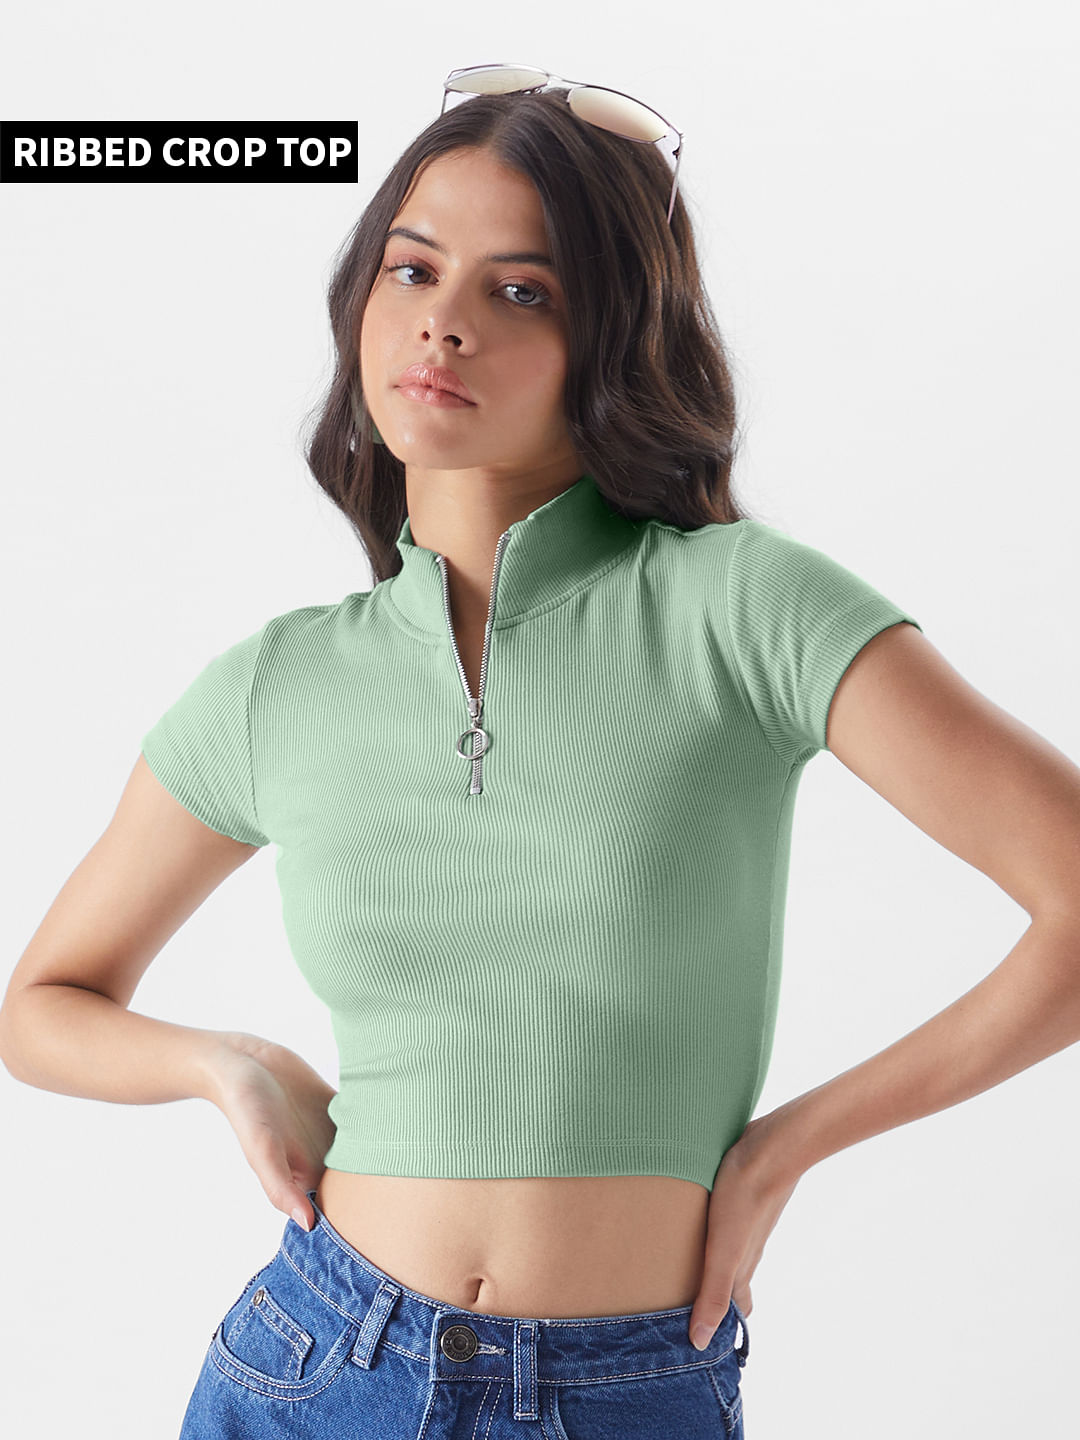 Buy Solids: Jade Green Women's Cropped Tops online at The Souled Store